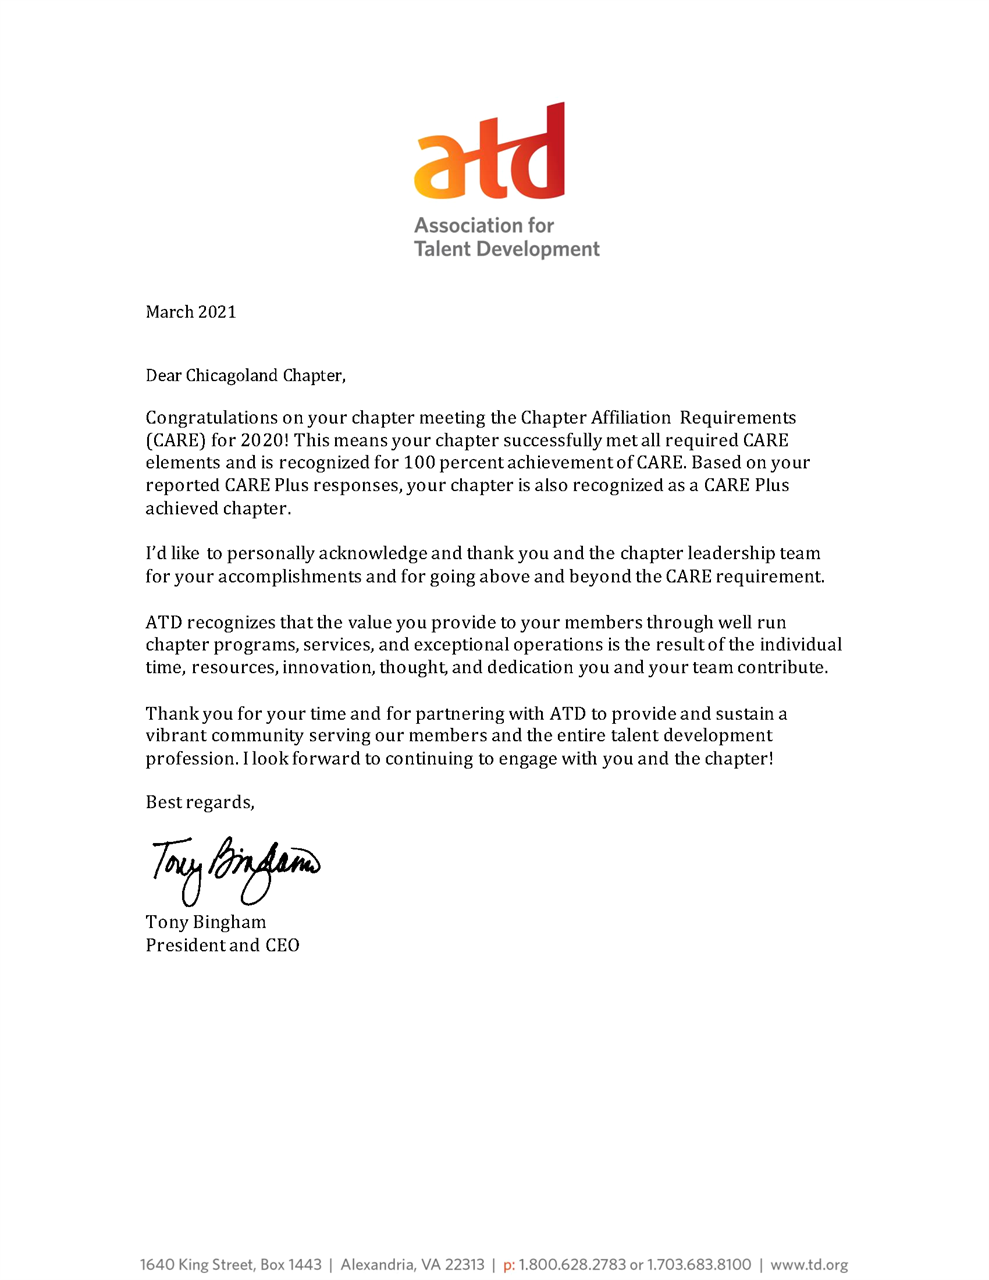 Letter from ATD CEO Tony Bingham recognizing ATDChi for achieving CARE Plus Status in 2021